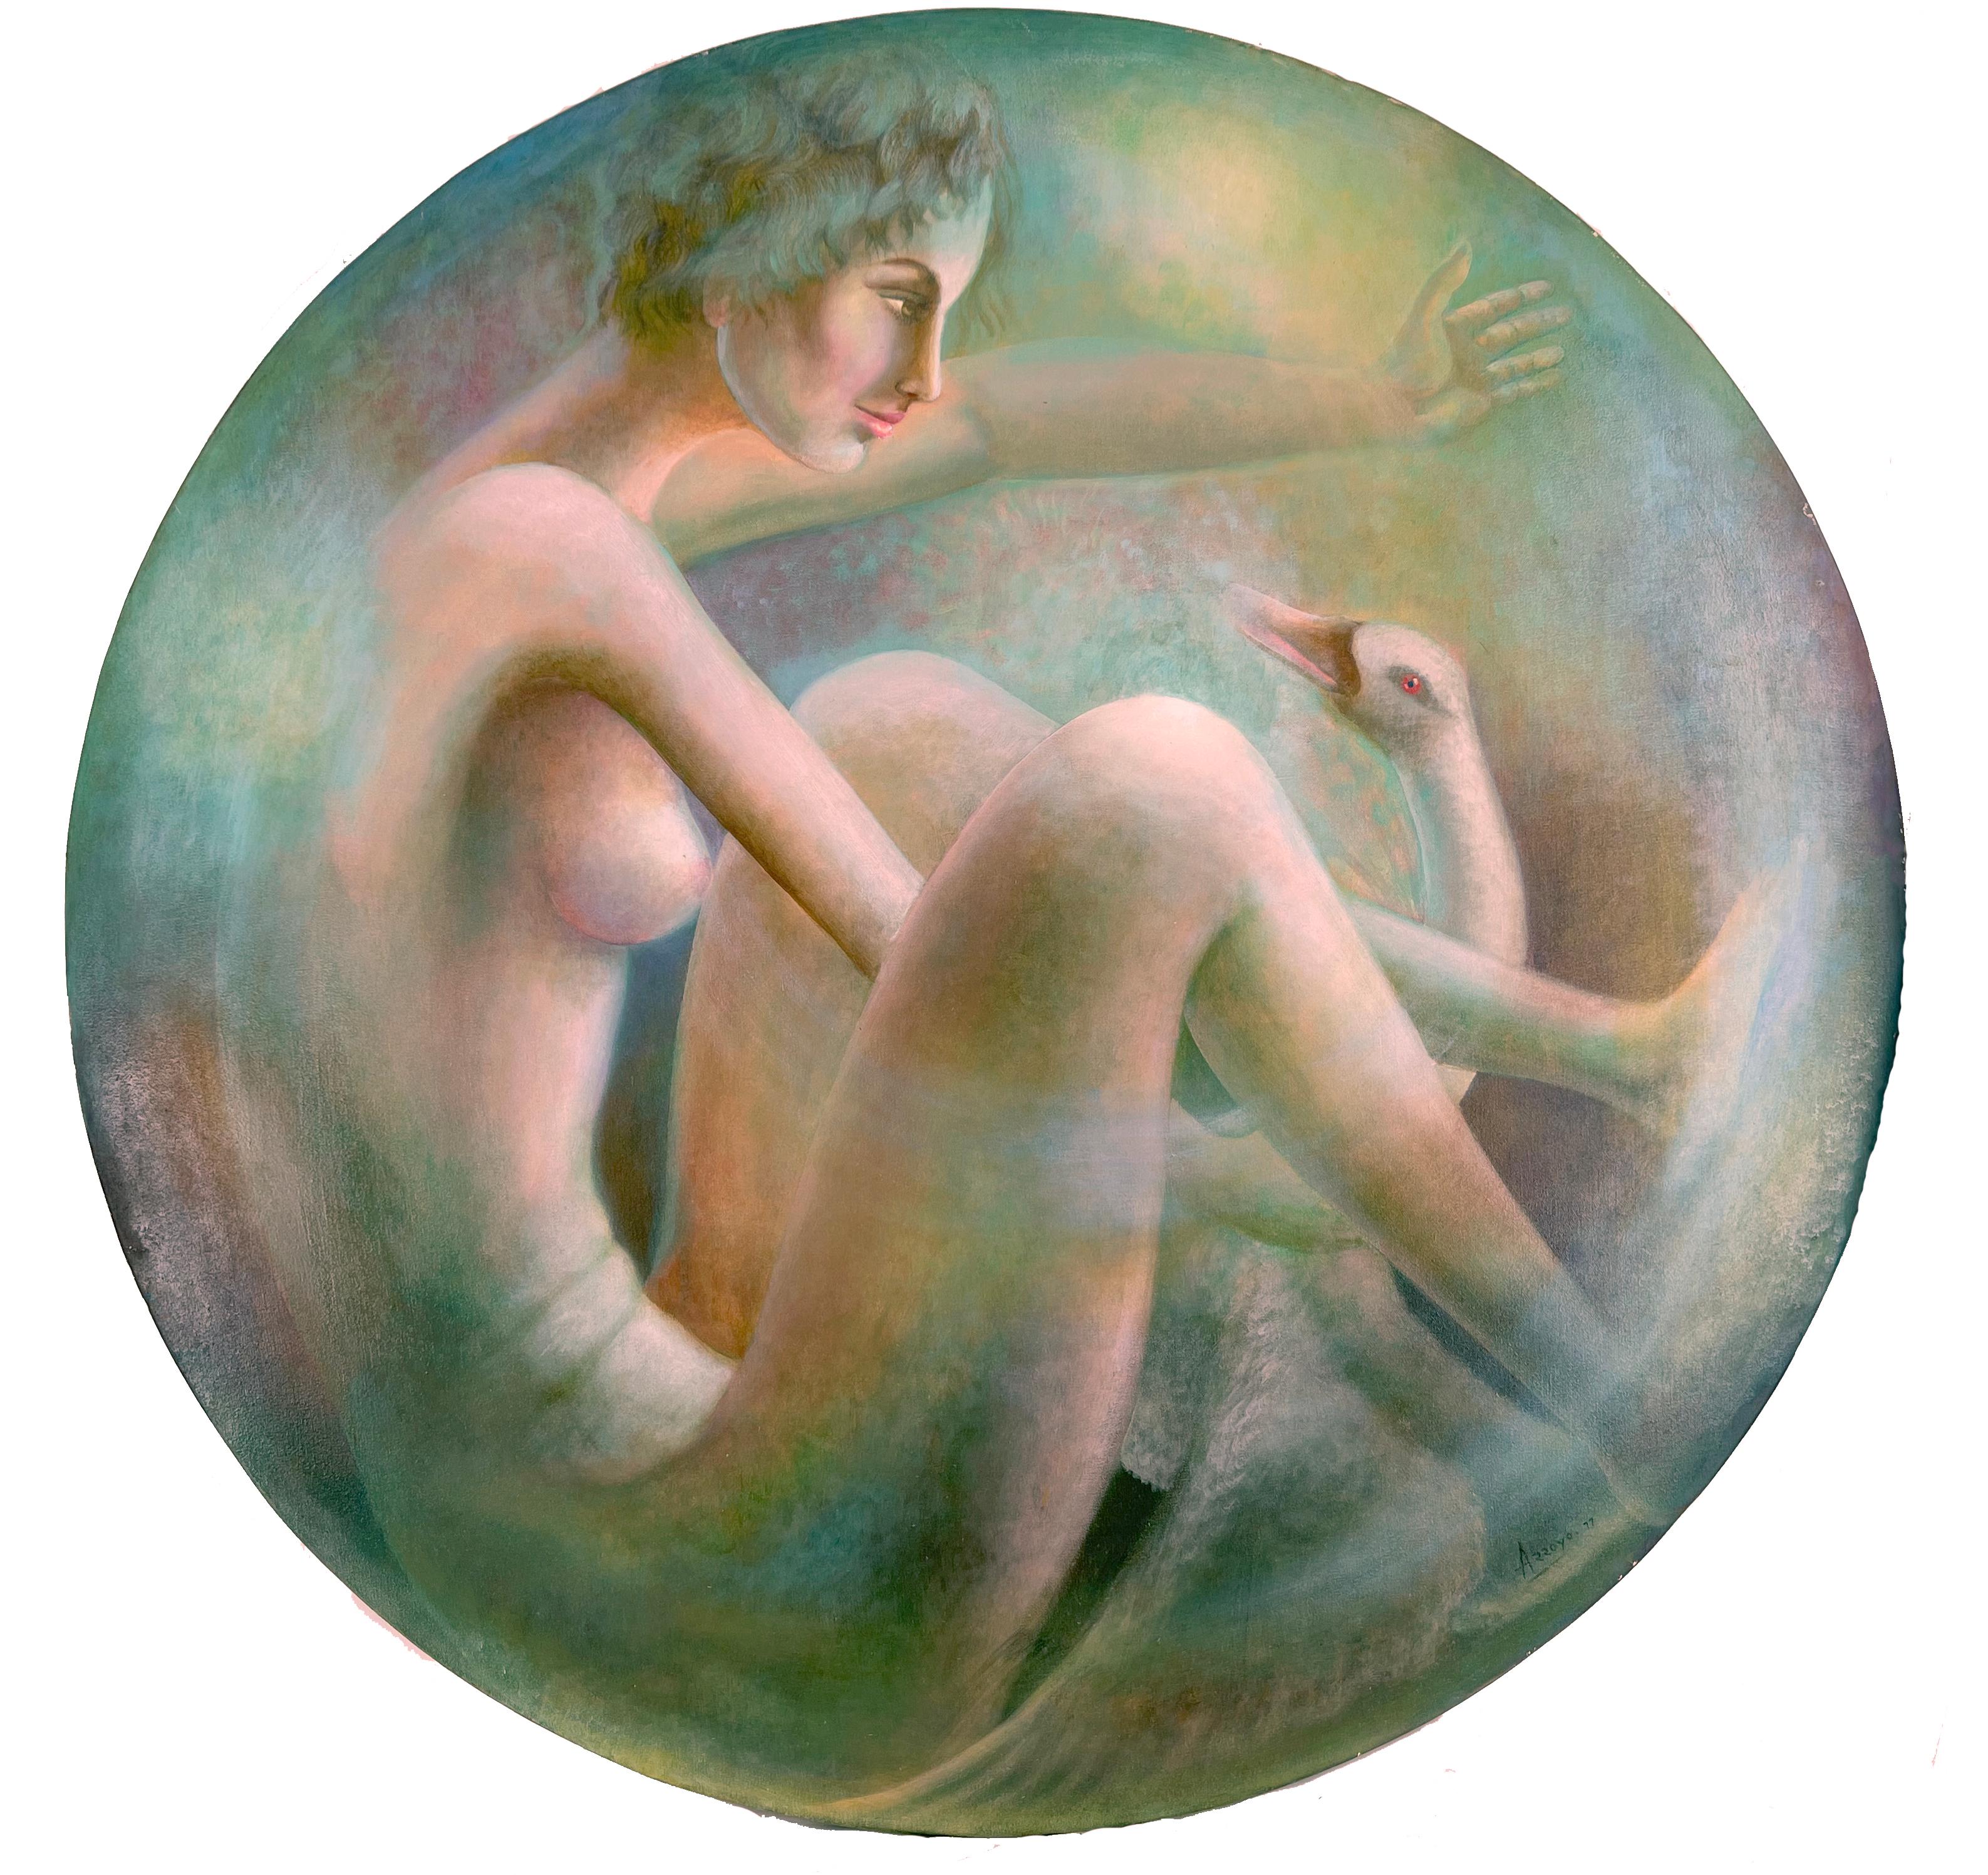 Figurative Nude with Swan Circular Oil on Canvas 